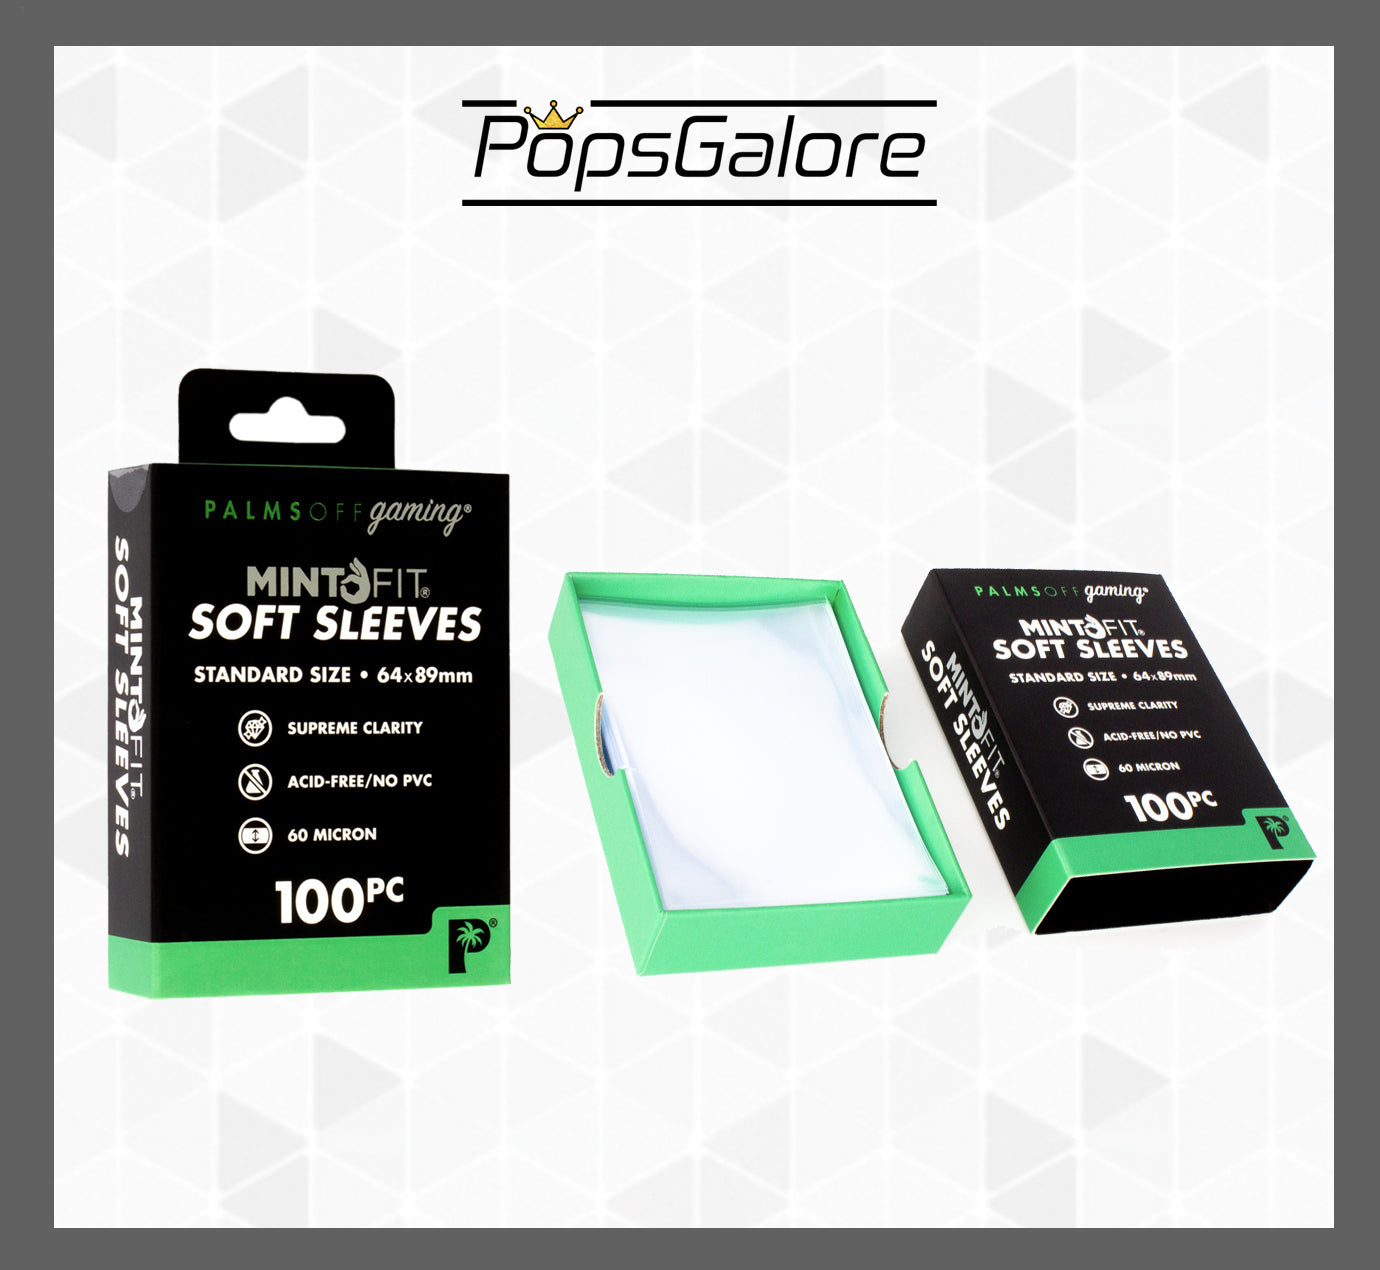 Mint-Fit Soft Sleeves - 100pc - POG